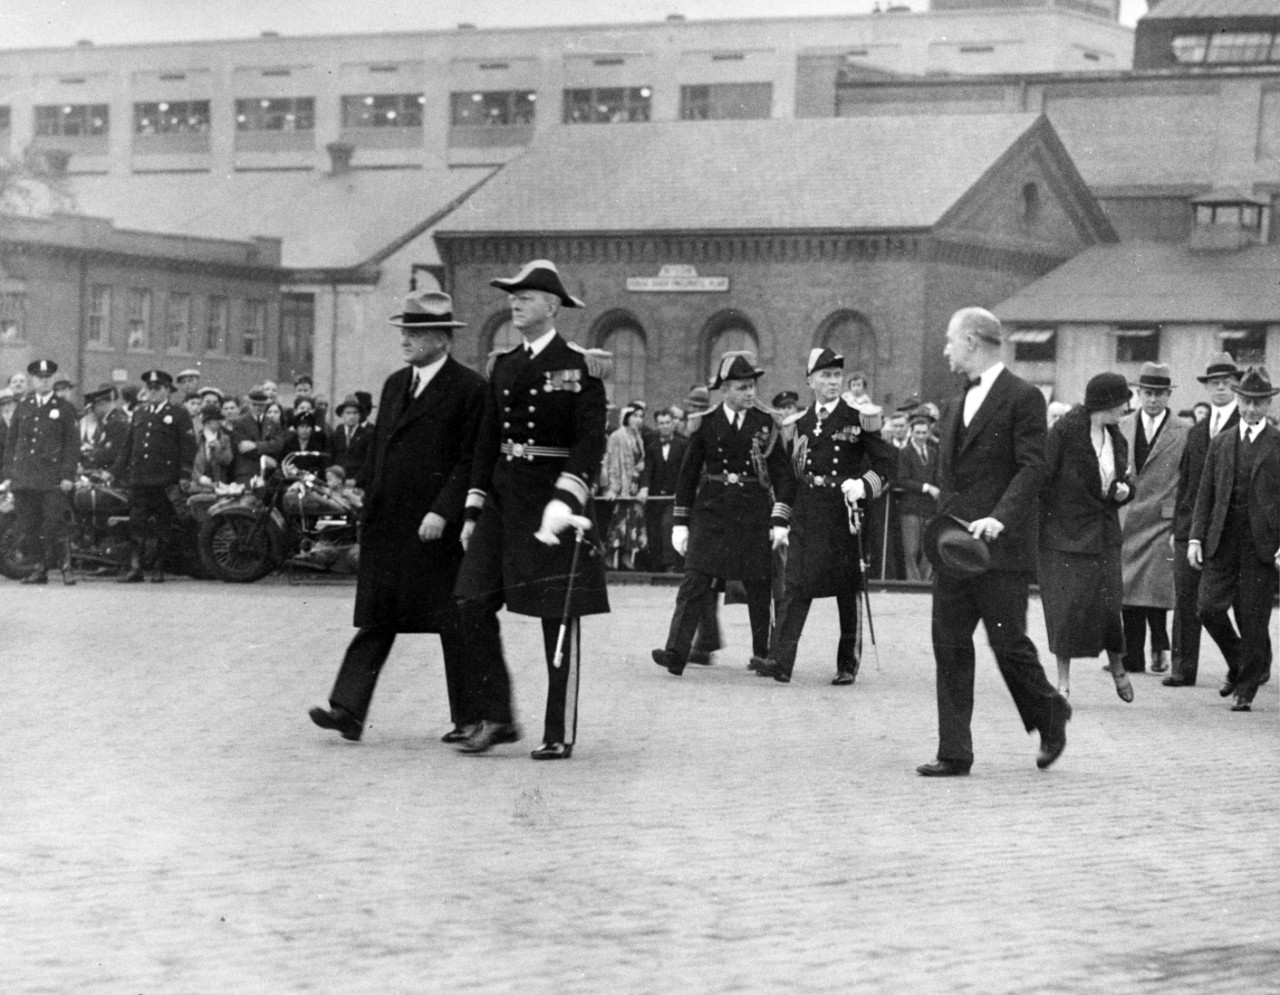 President Herbert Hoover on his way to the presidential barge to inspect USS Constitution at the Washington Navy Yard.